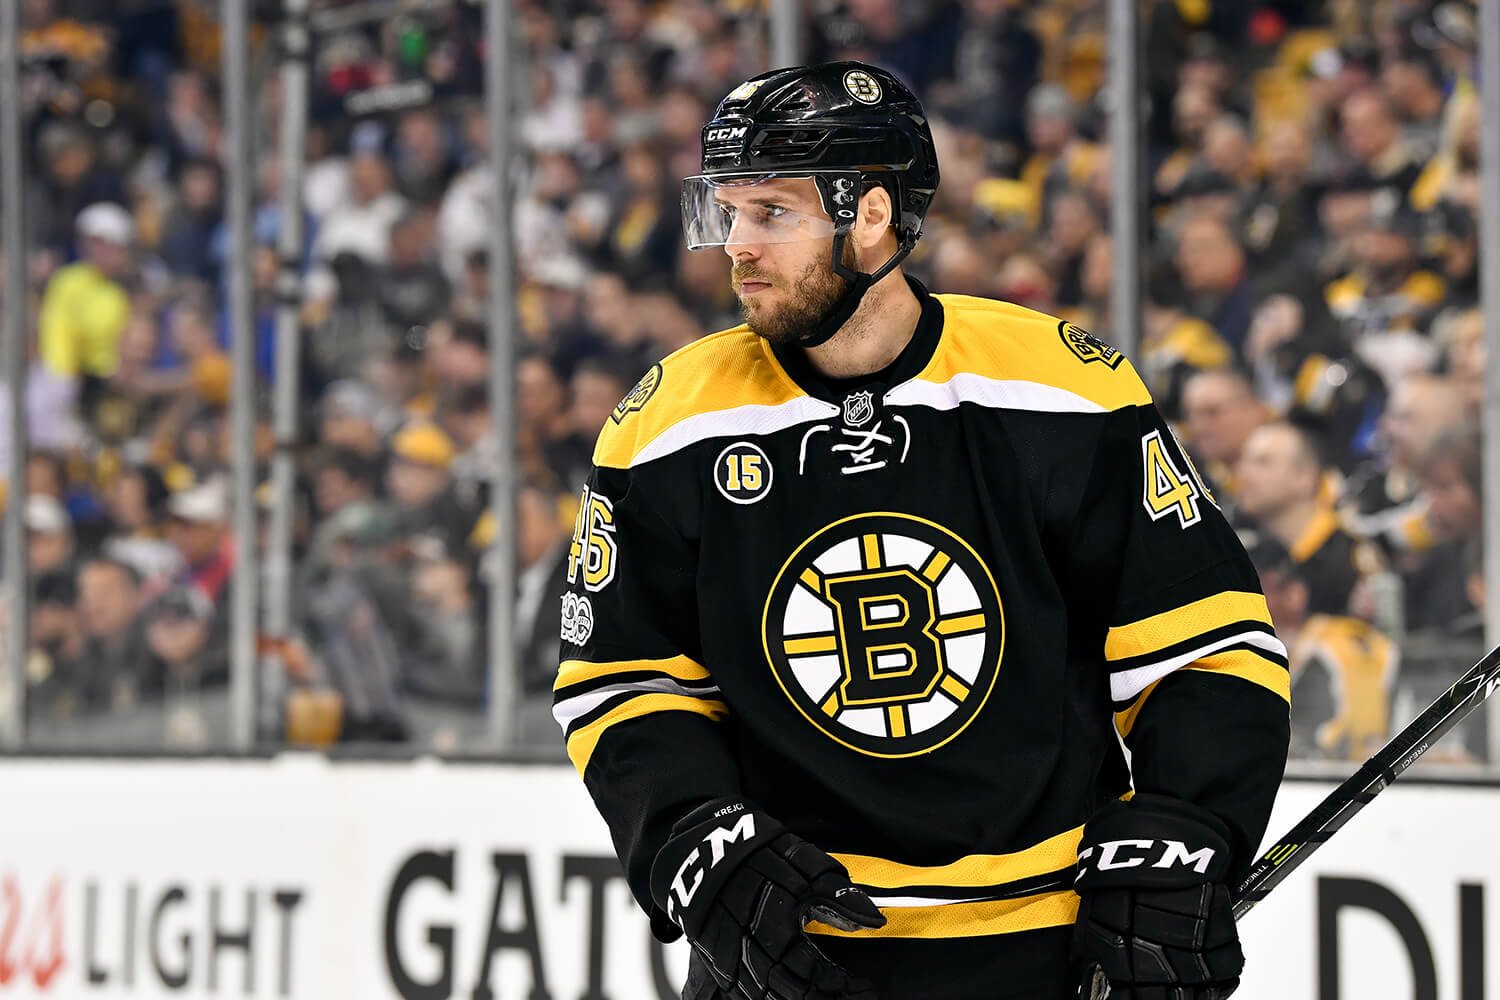 Tough Game 3 Loss Puts Bruins In Early Deficit